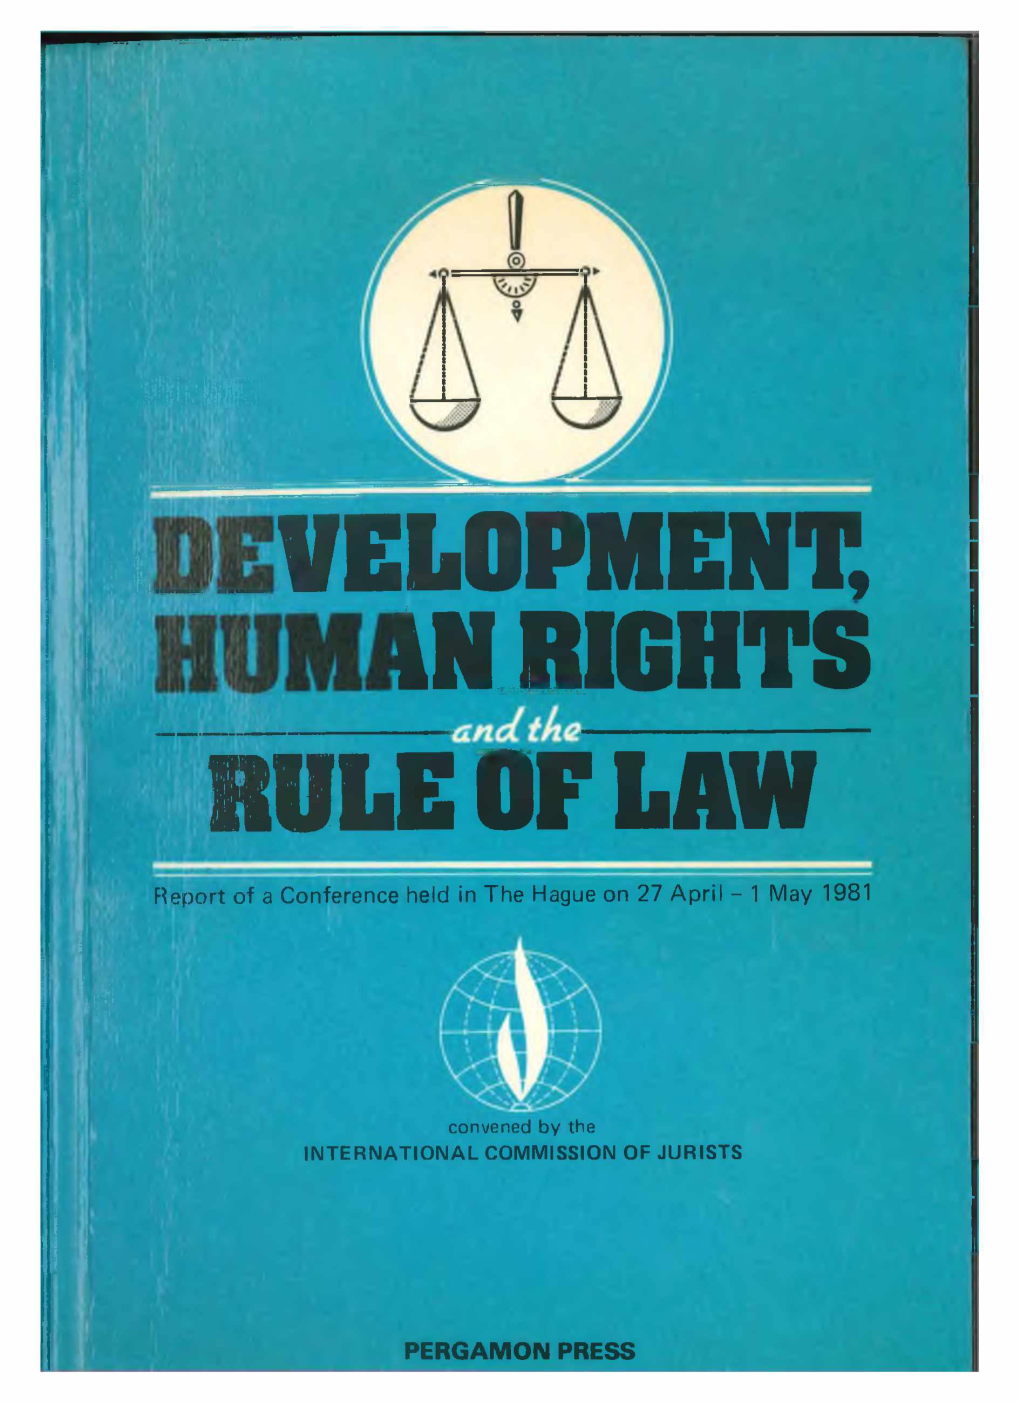 Development Human Rights and the Rule of Law-Conference Report-1981